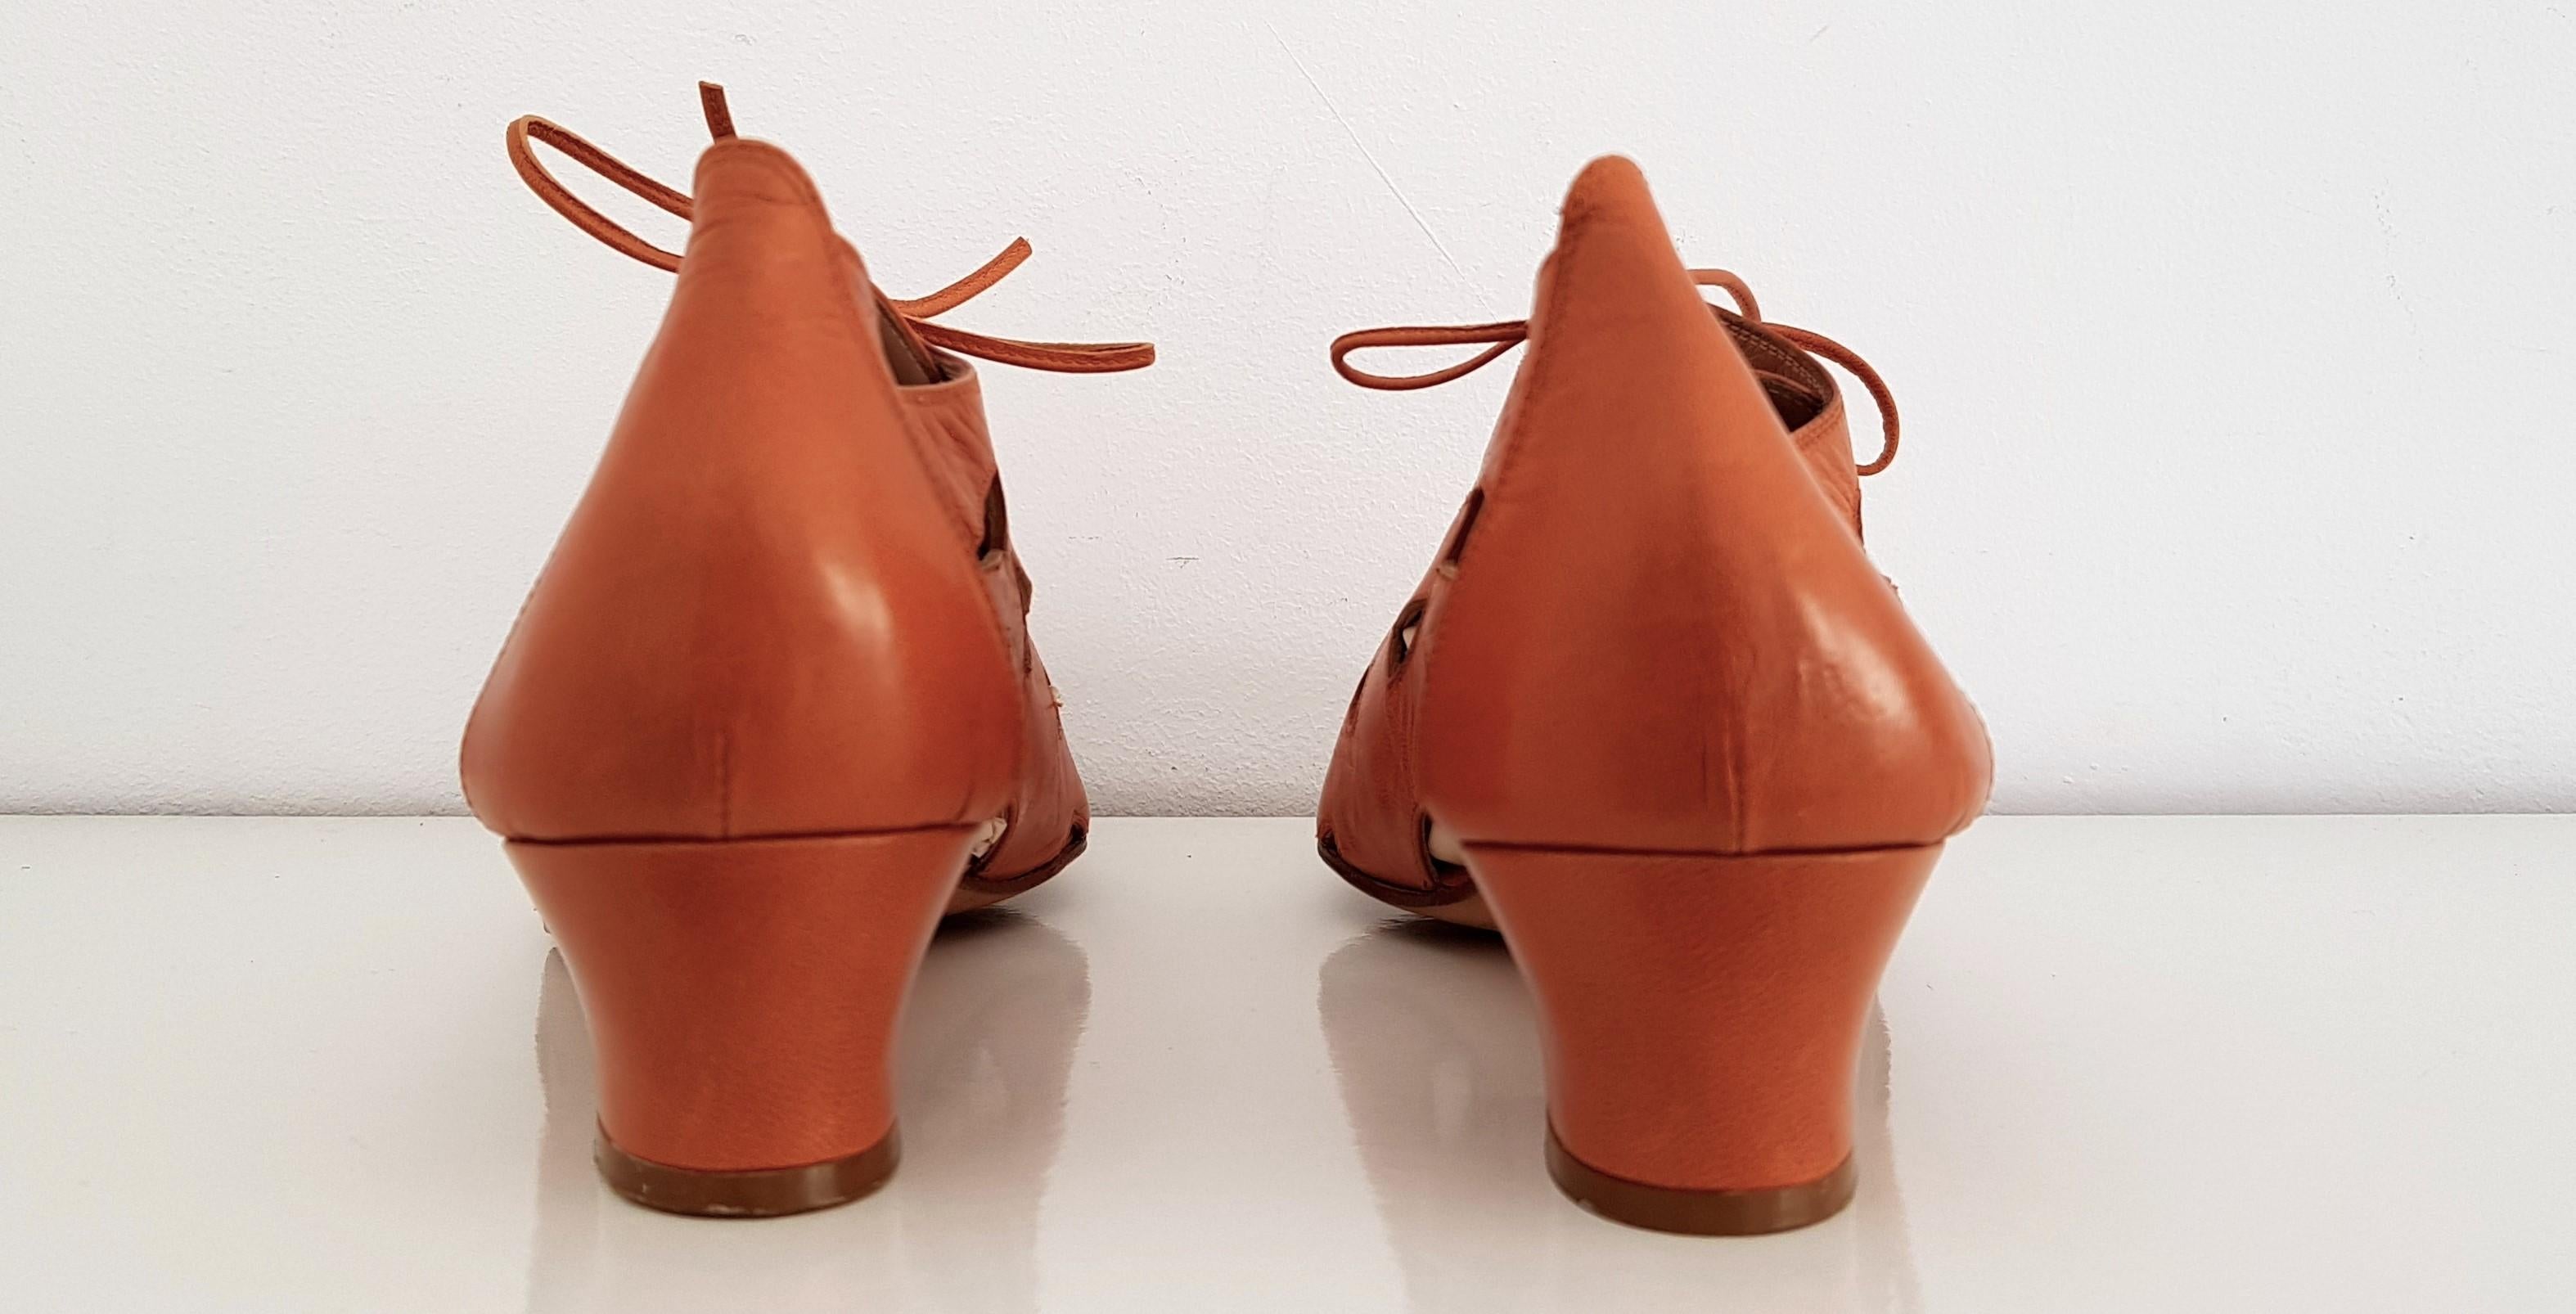 Maud Frizon Shoes with different designed holes. 
Color: Camel/Caramel 
Leather
Conditions: Great conditions, something marked on the sole but for the rest they are in perfect condition.
Heel height: 3.8 cm
Size 10 (US)
Made in Italy